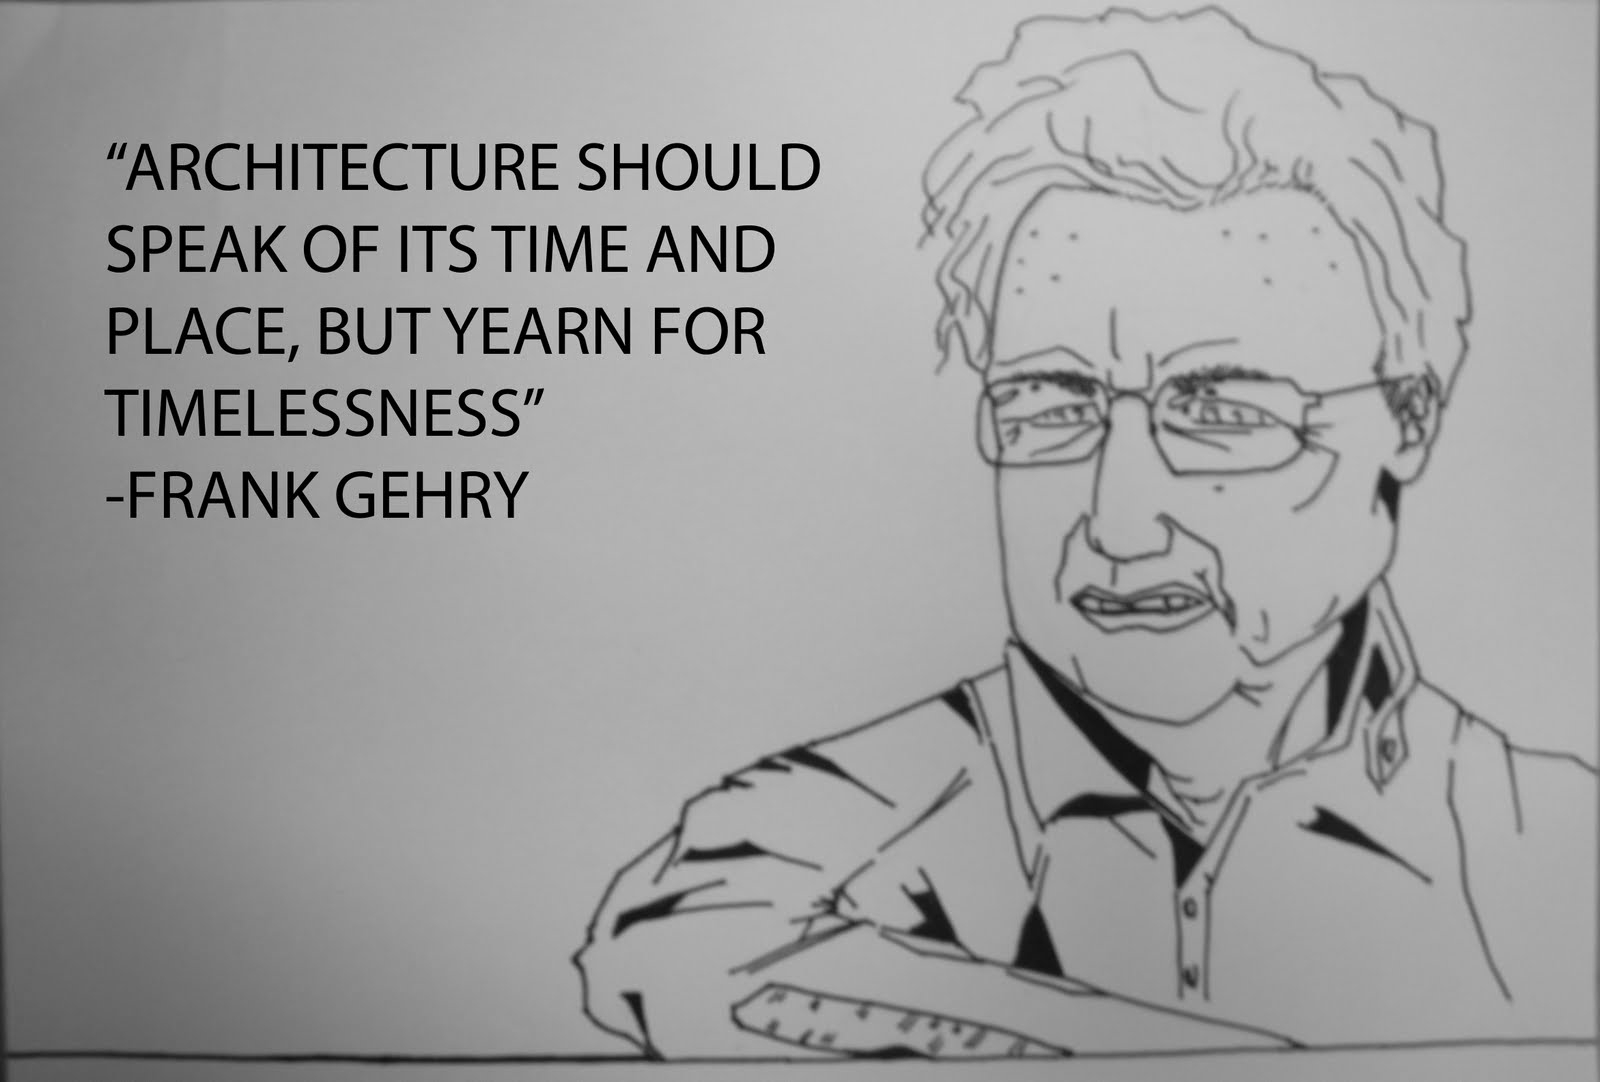 Frank Gehry's quote #2